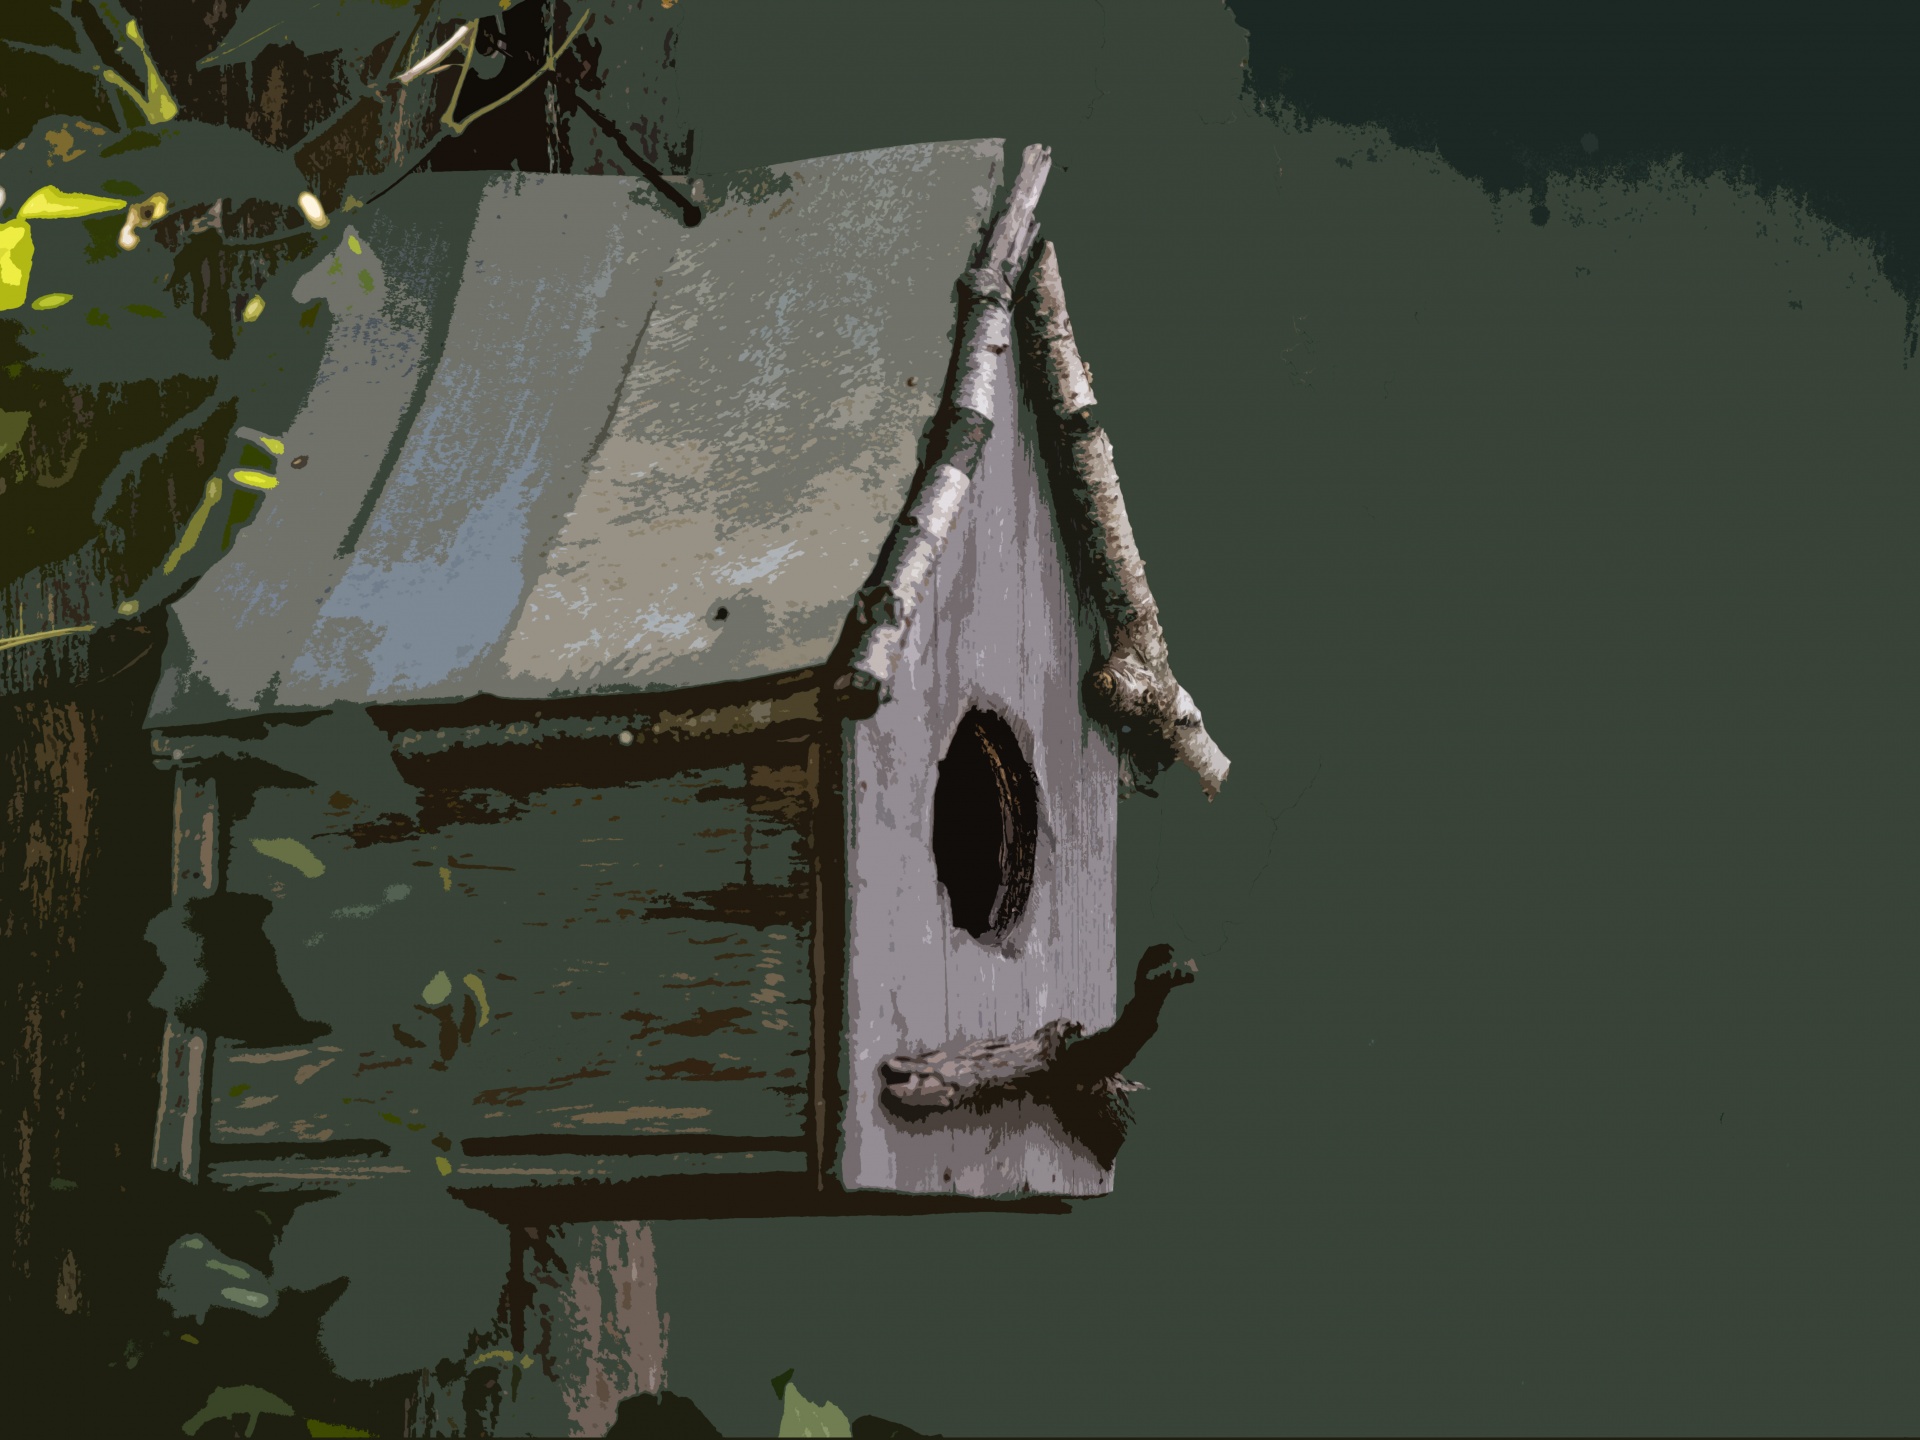 Birdhouse in greens and browns, artistic affect, simplified